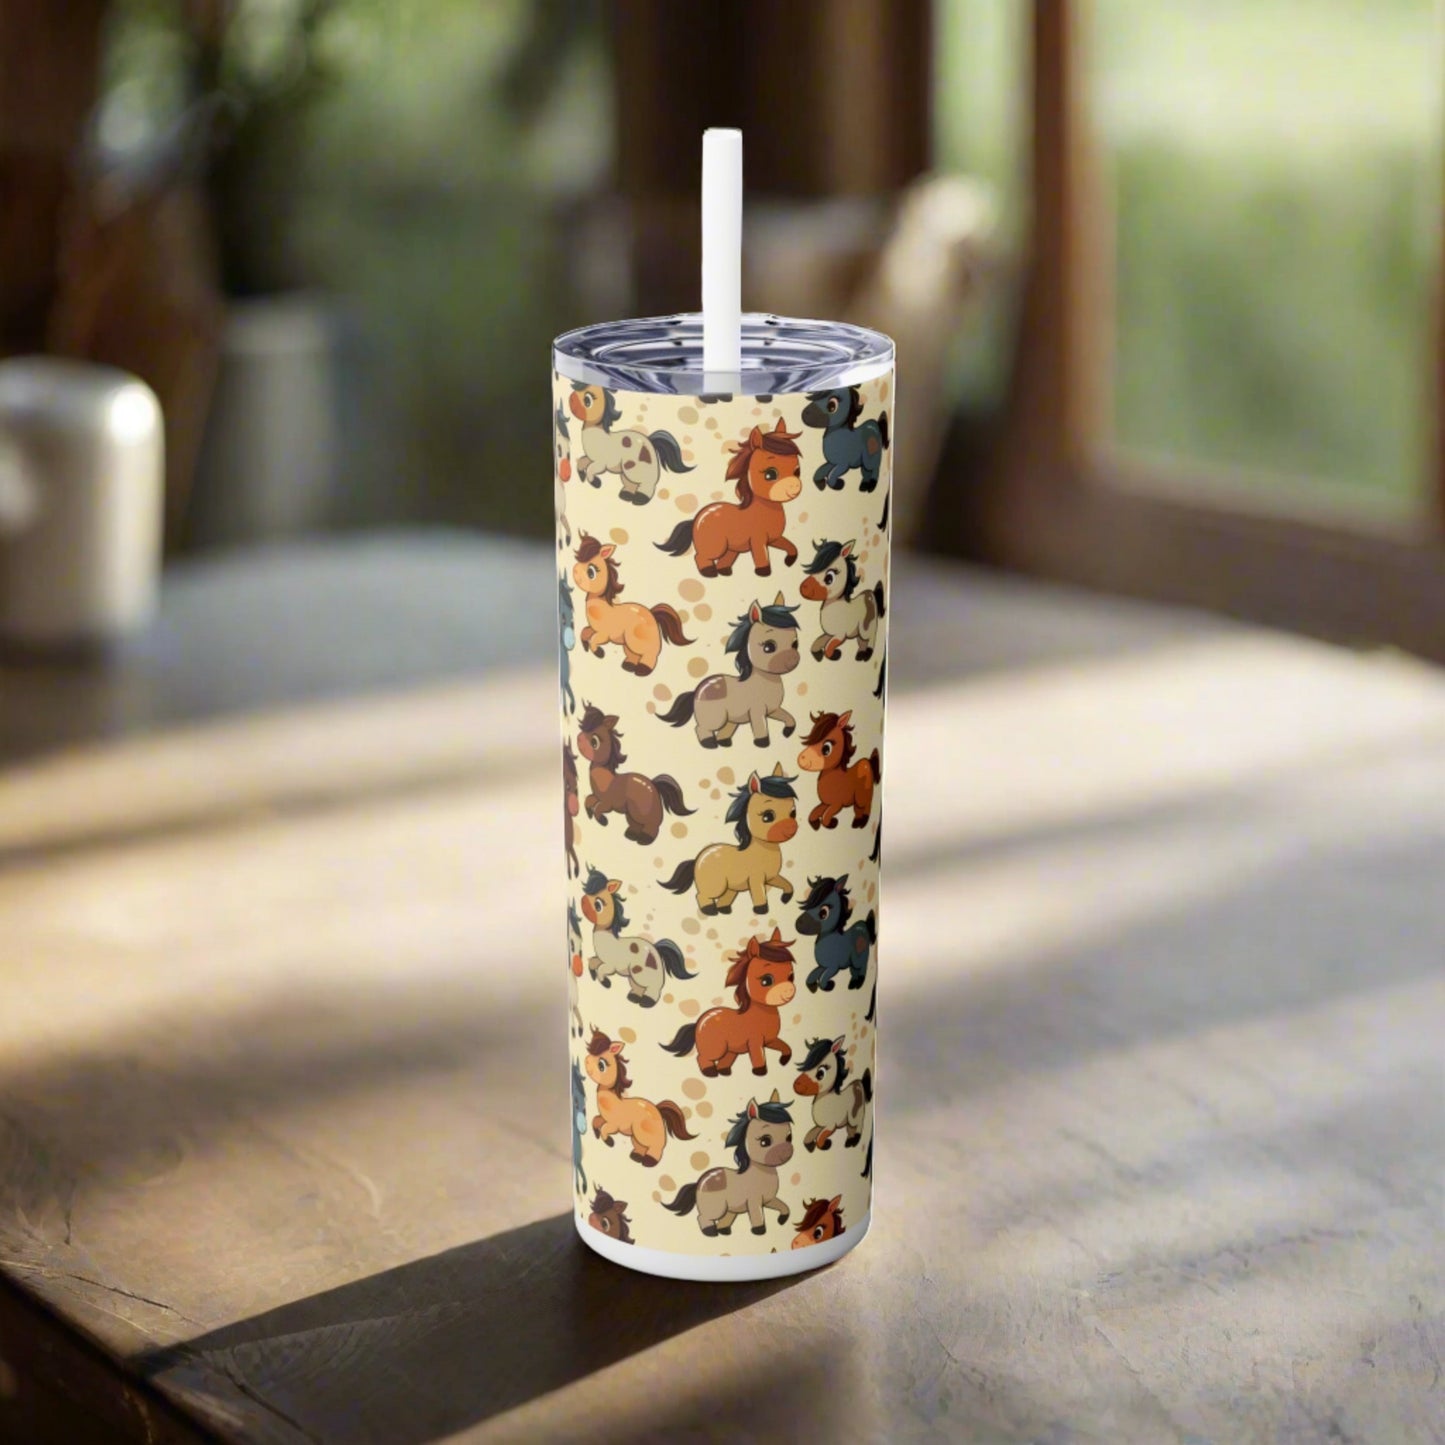 Insulated 20 oz Tumbler with Lid & Straw, Cute Baby Horses - Double-walled Stainless Steel, Keeps Drinks Hot or Cold